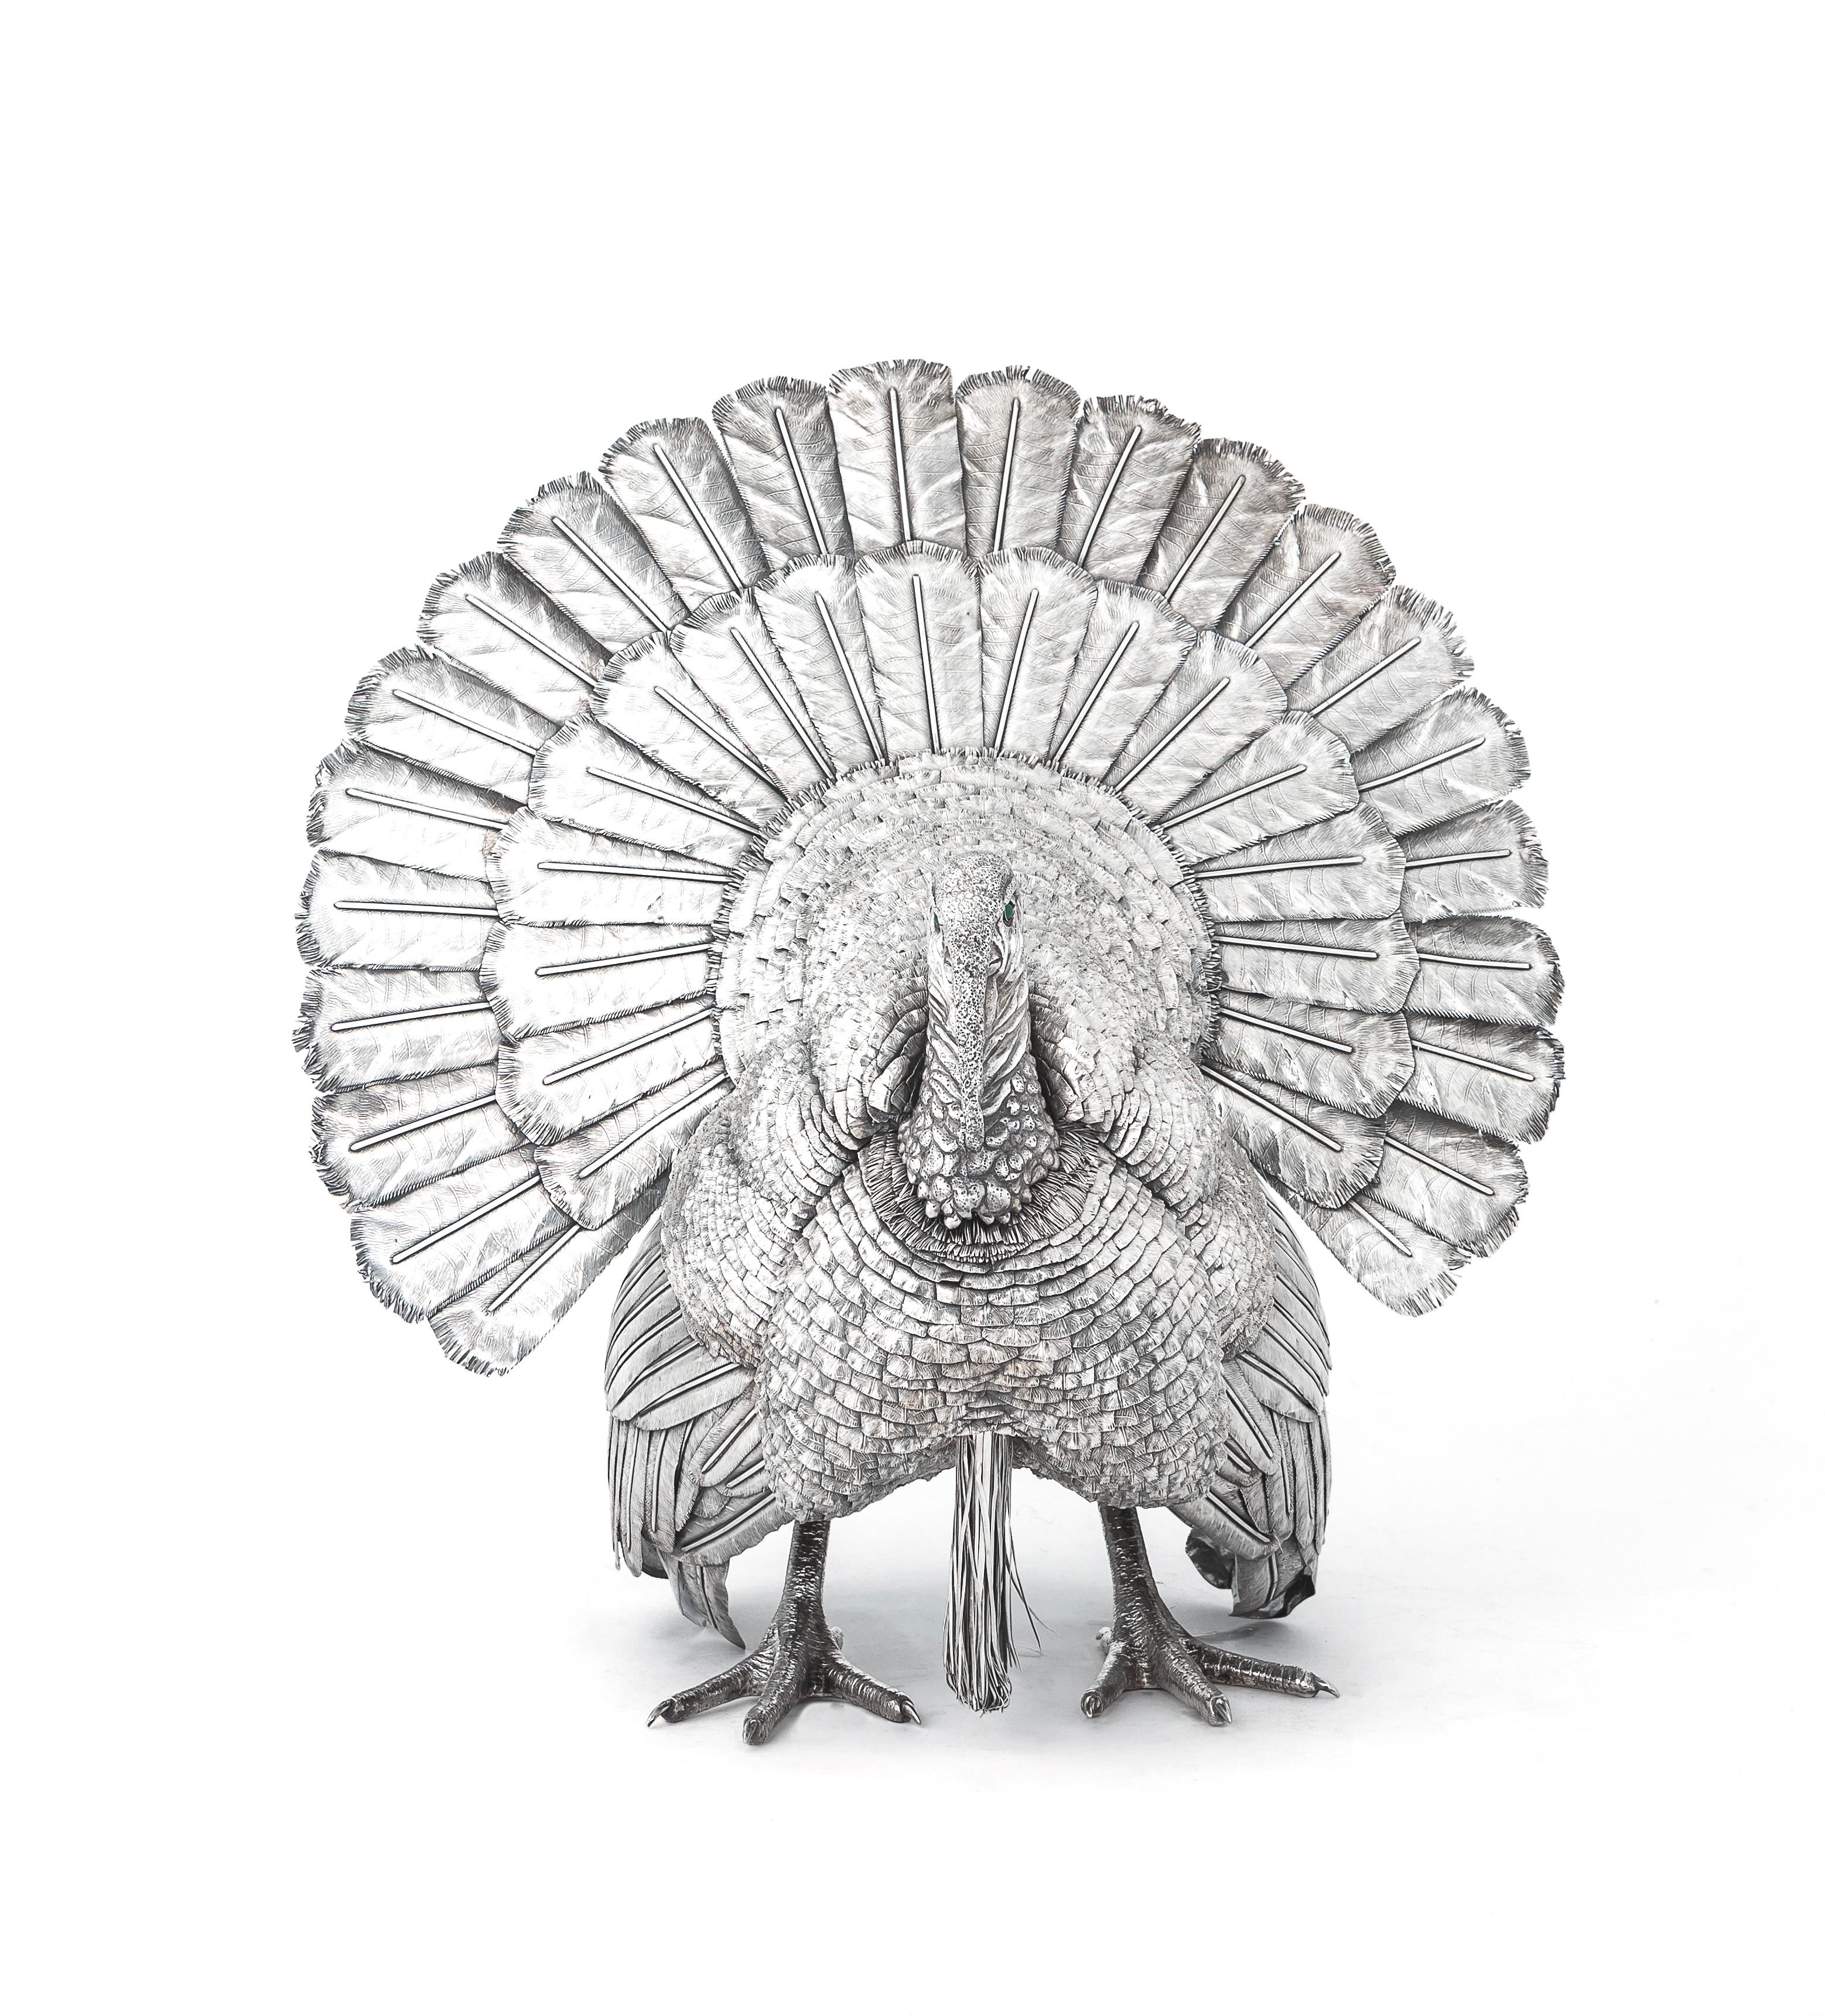 20th Century Italian silver turkey, by artist Mario Buccellati from Milan. It is engraved on one tail feather M. Buccellati, marked on another tail feather 800 and with Italian factory mark.  His pieces reflect a rich history of classic, yet fresh